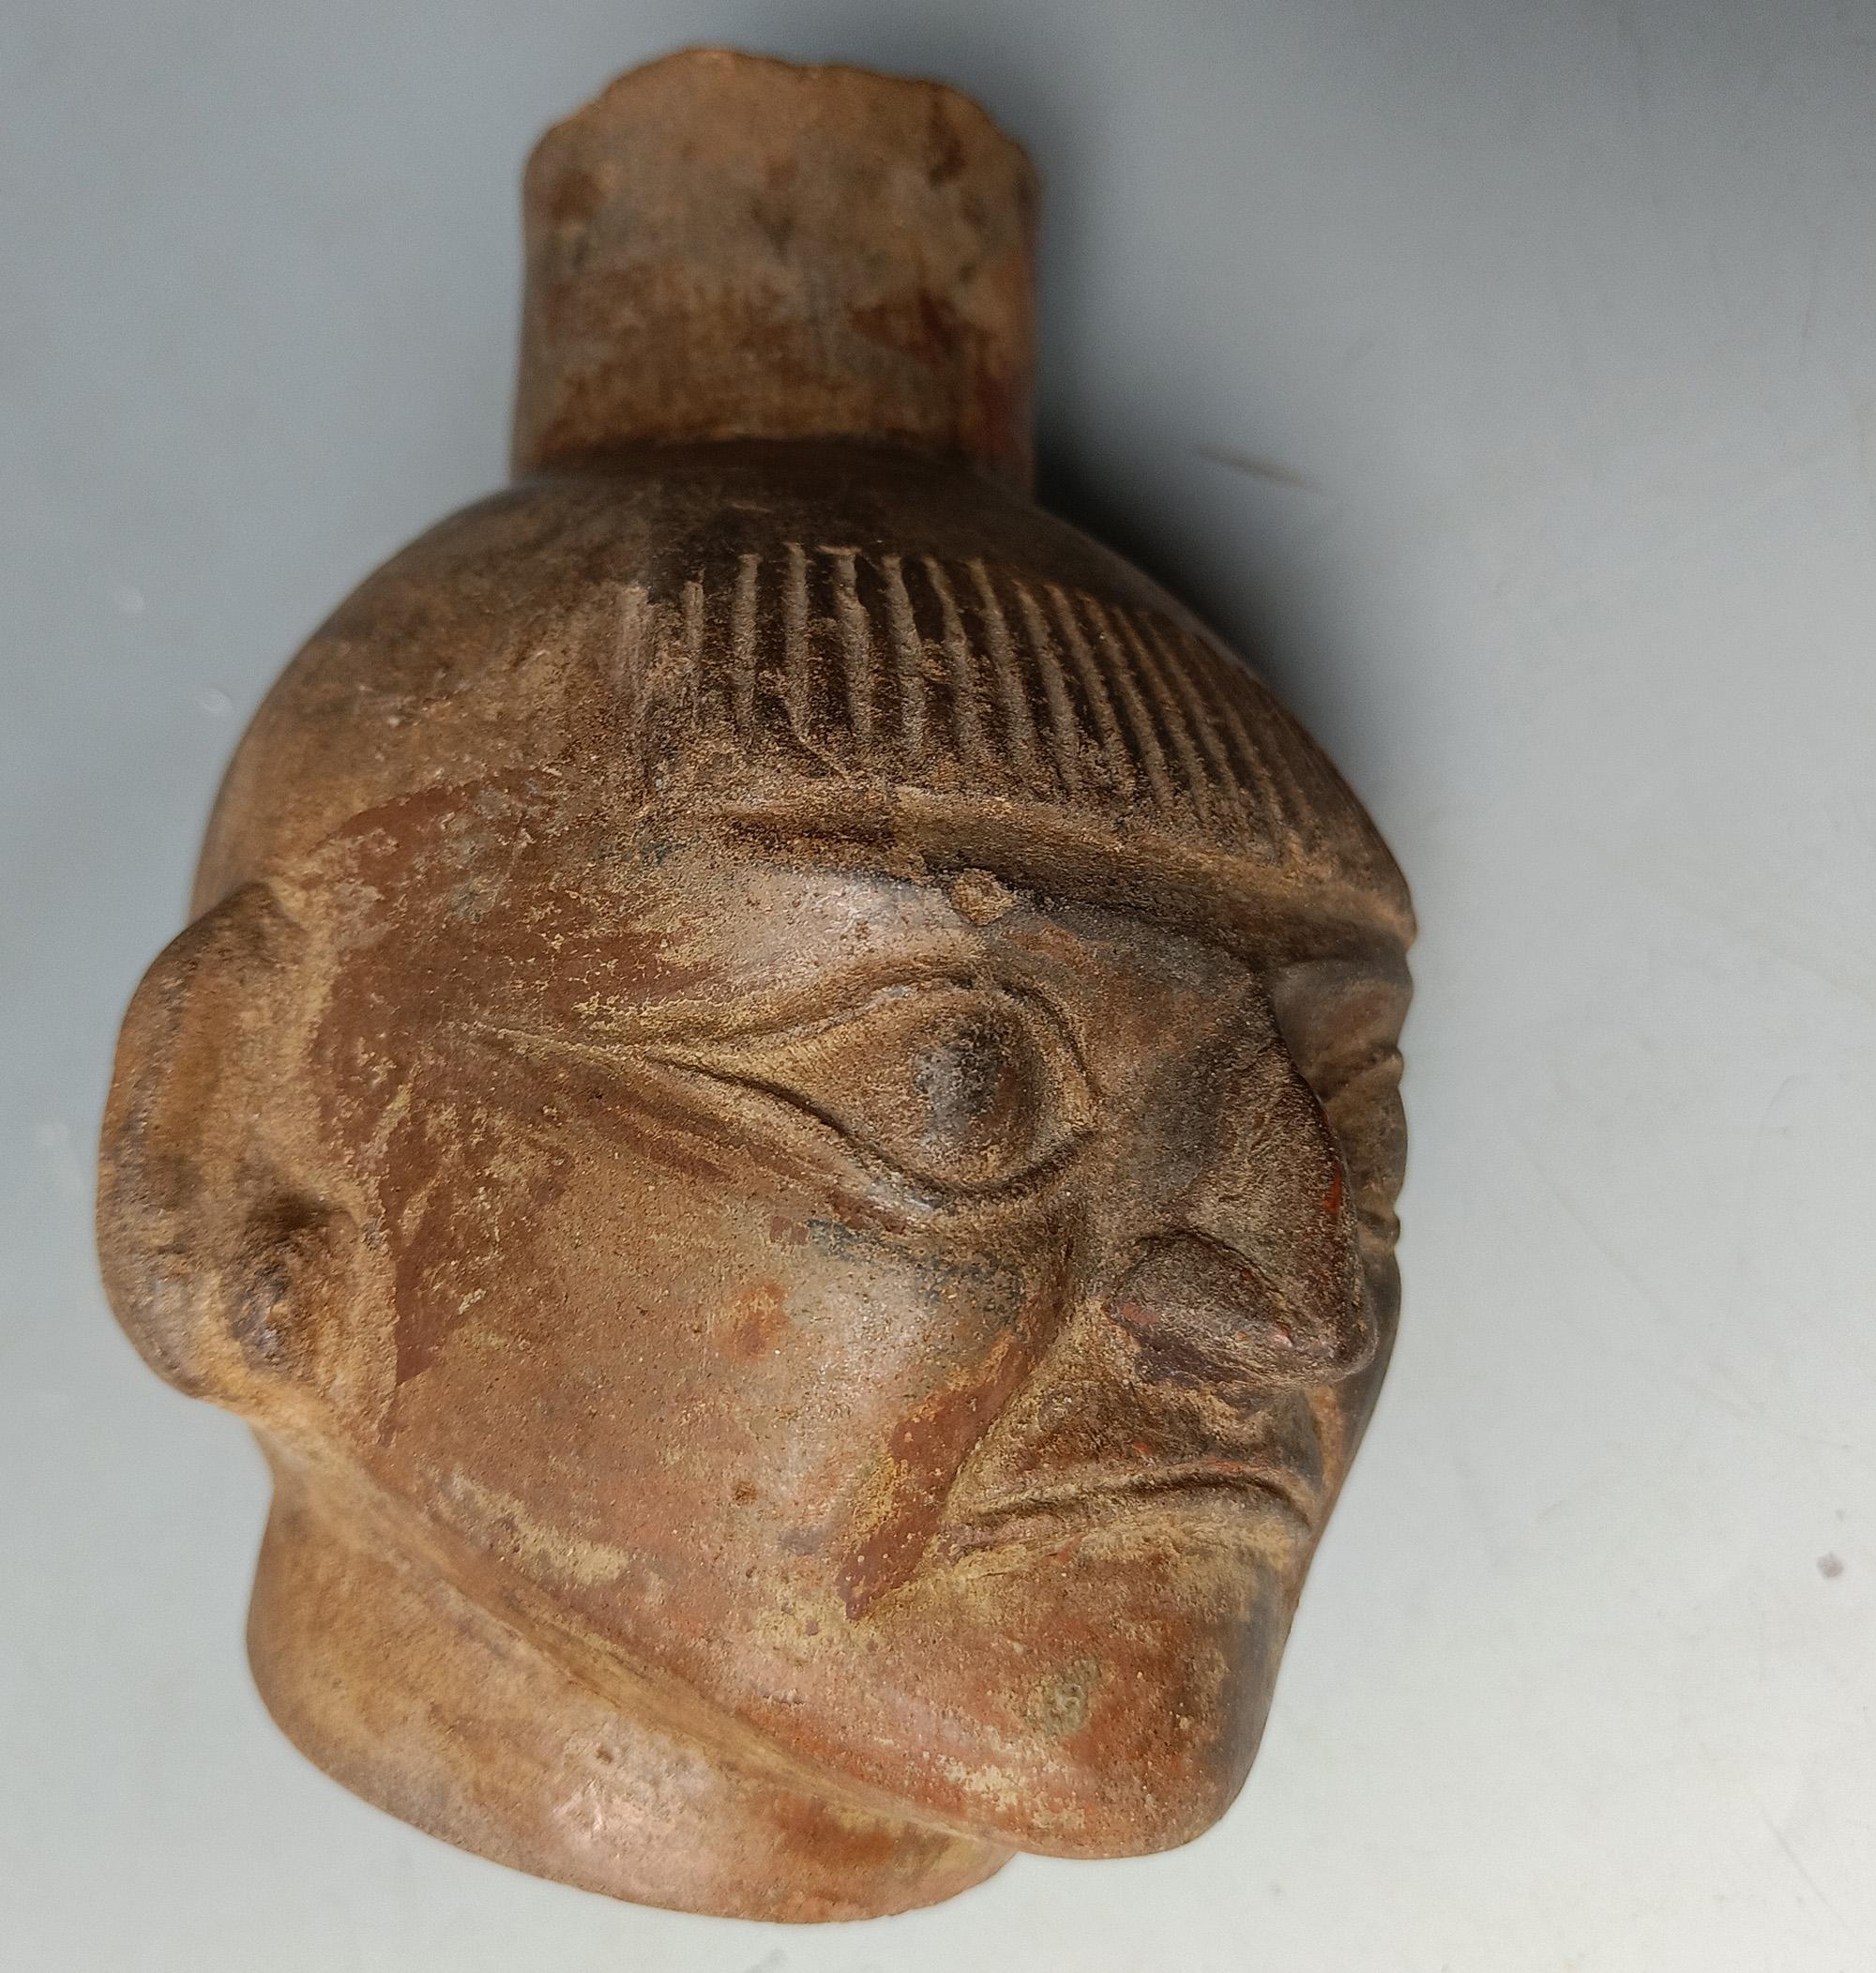 A Pre columbian Moche portrait Vessel
A  vessel modelled on a Amazonian native American Indian, a personage with a grimacing face perhaps a prisoner the shaved head and fringe is typical of indigenous Amazonian tribes, who wear this hair style, with